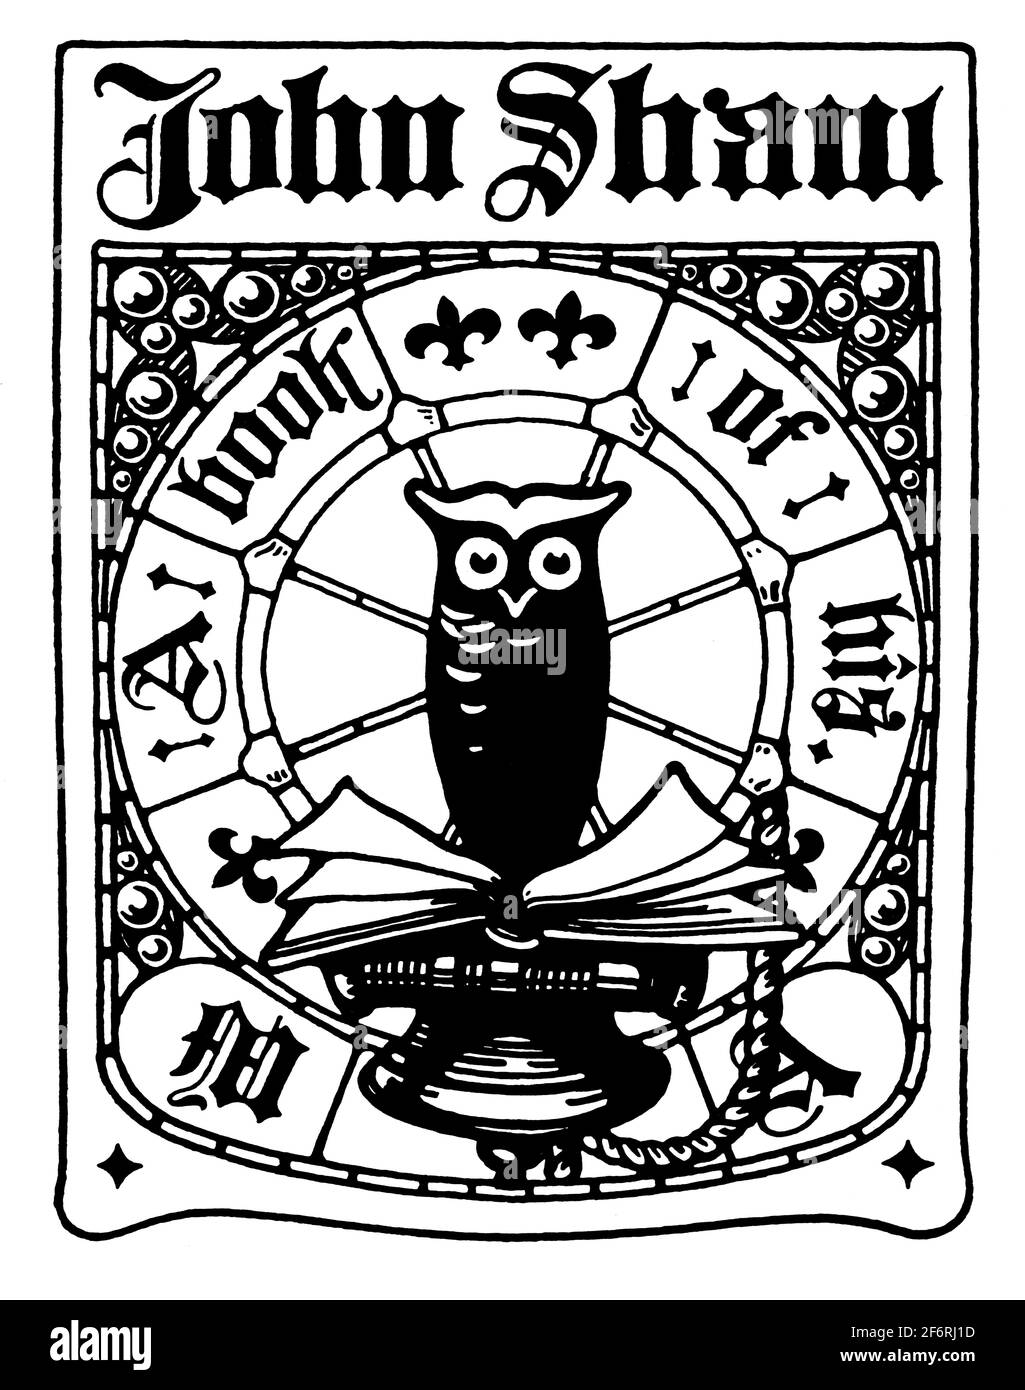 John Shaw wise owl motif bookplate by Manchester stained glass designer Edward H Atwell from 1903 The Studio Magazine of Fine and Applied Art Stock Photo